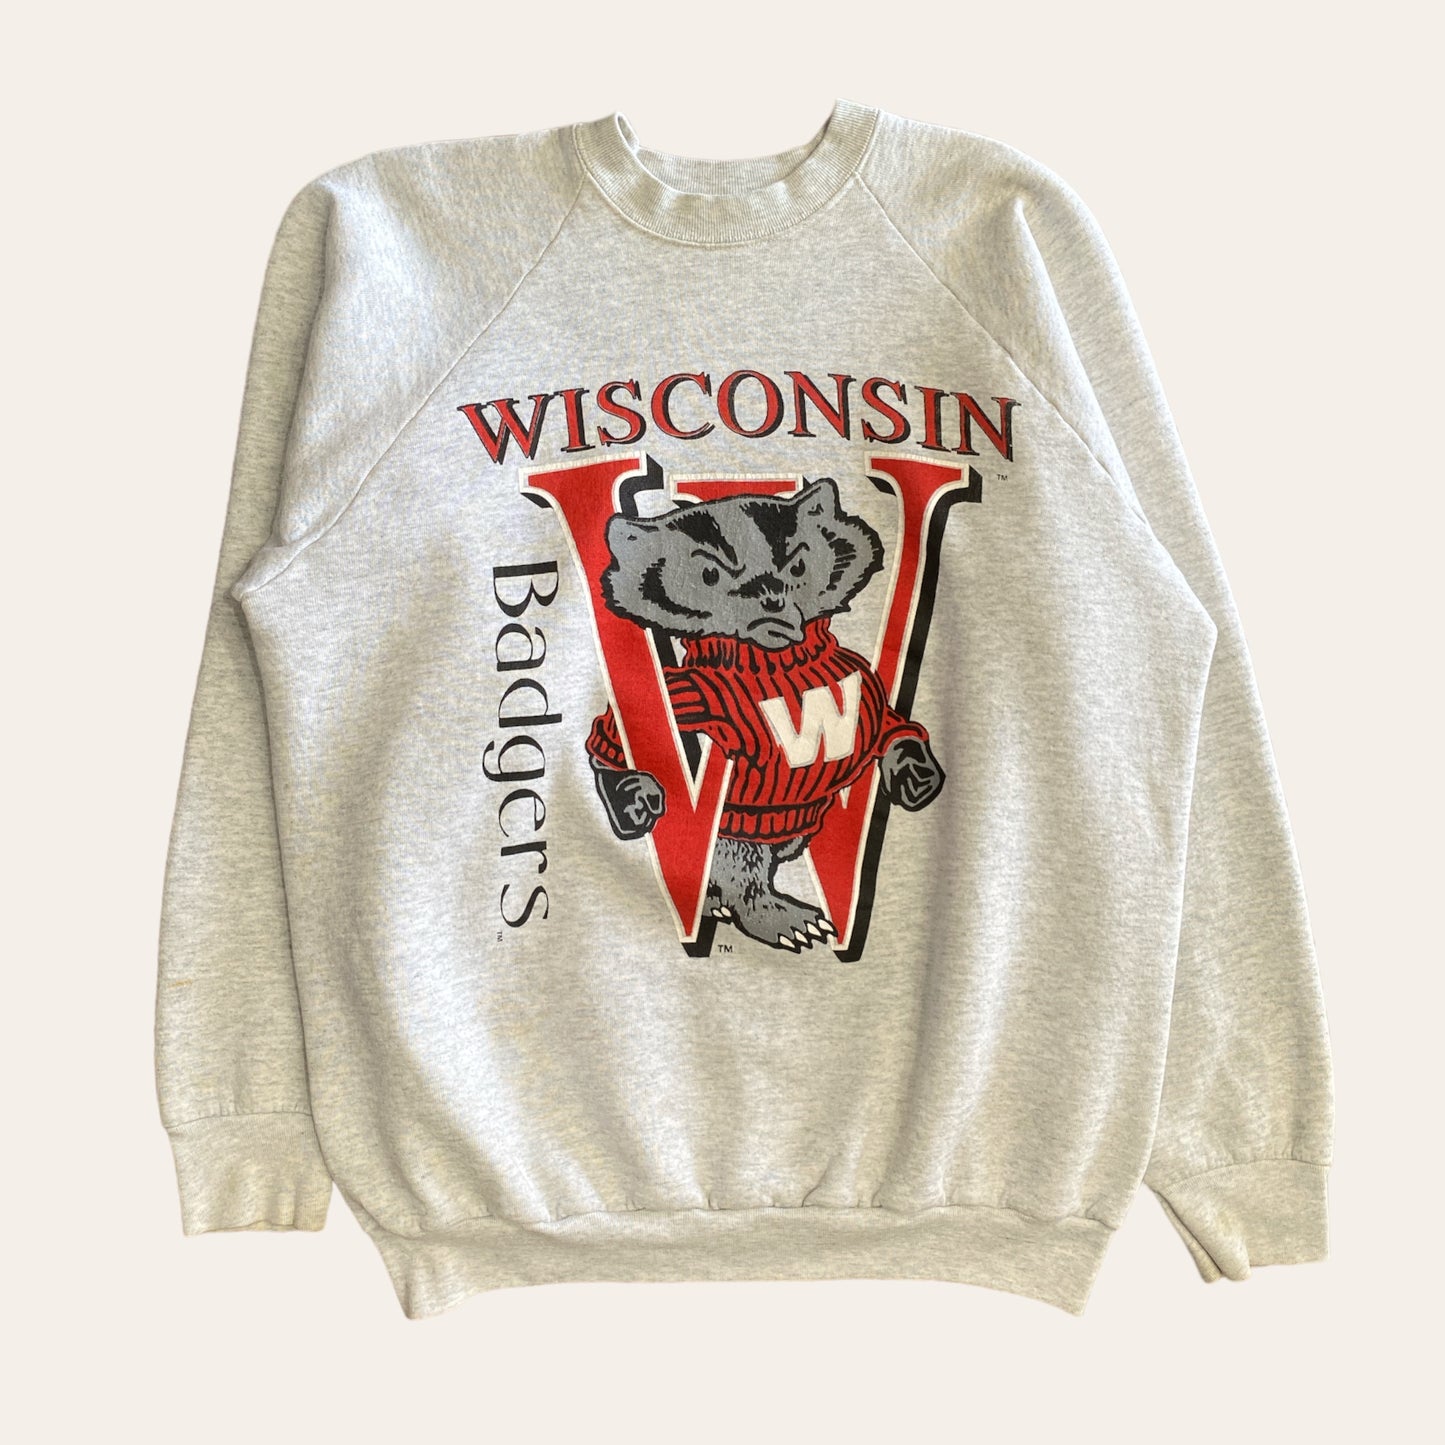 1999 Wisconsin Badgers Football Sweater Size L